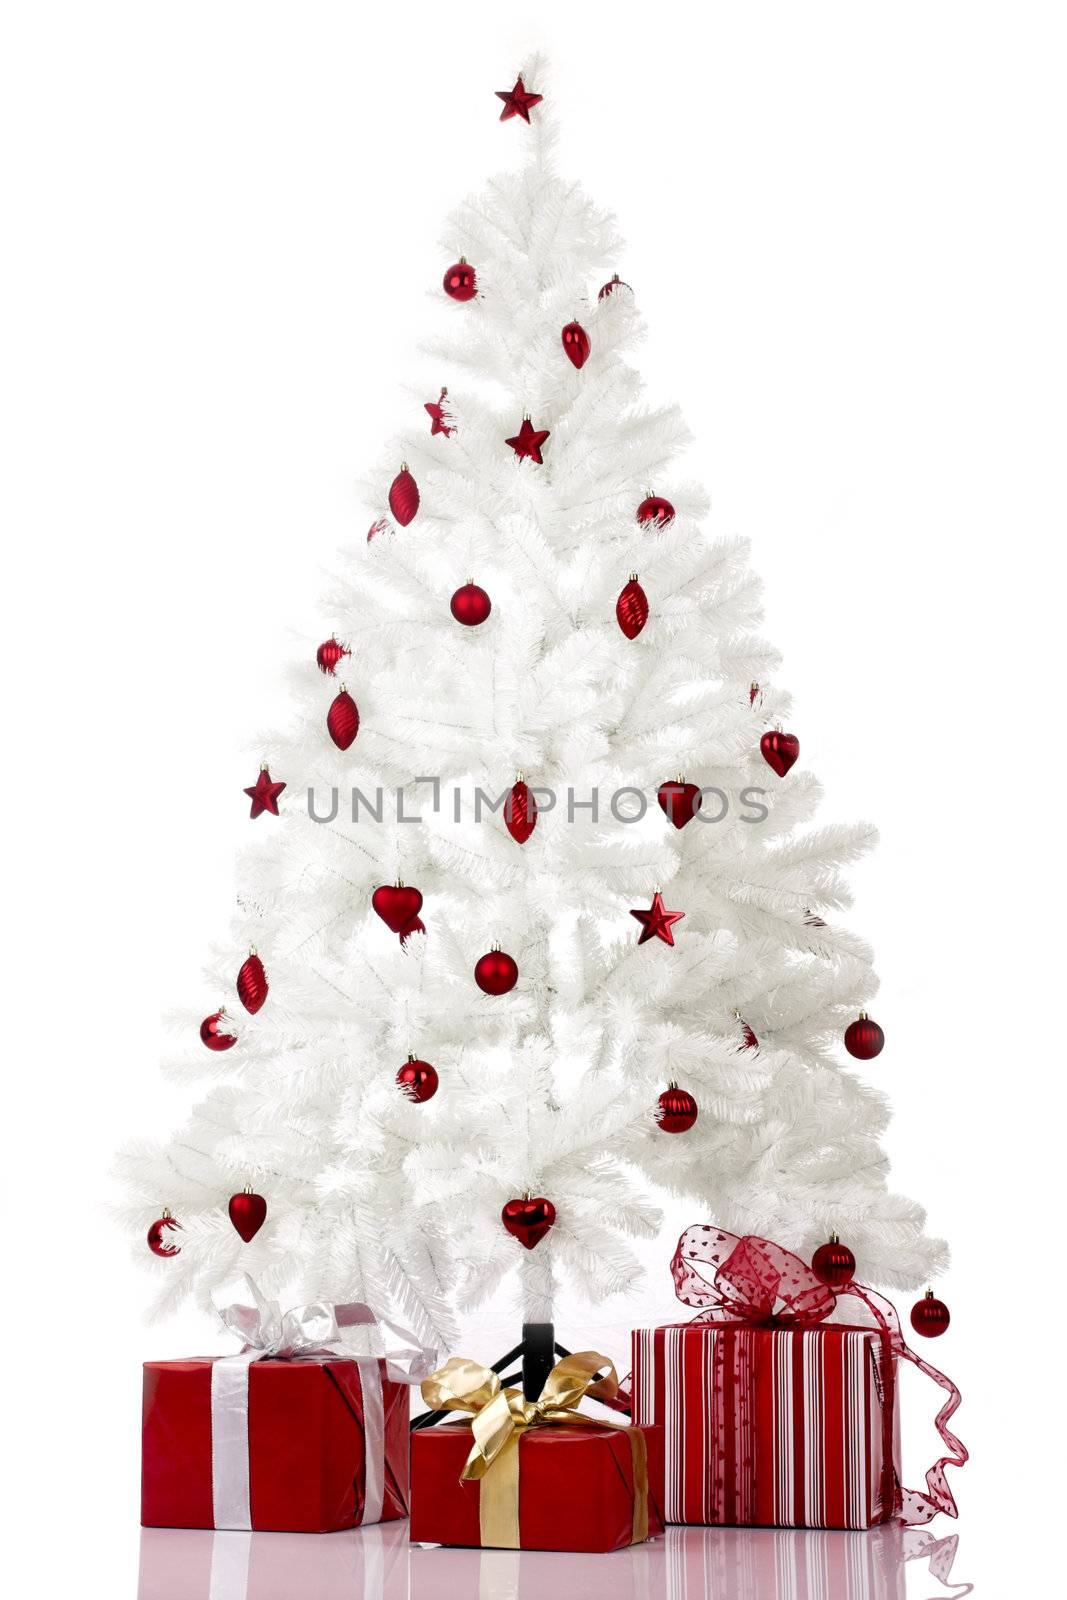 Christmas white tree and gifts over a white background